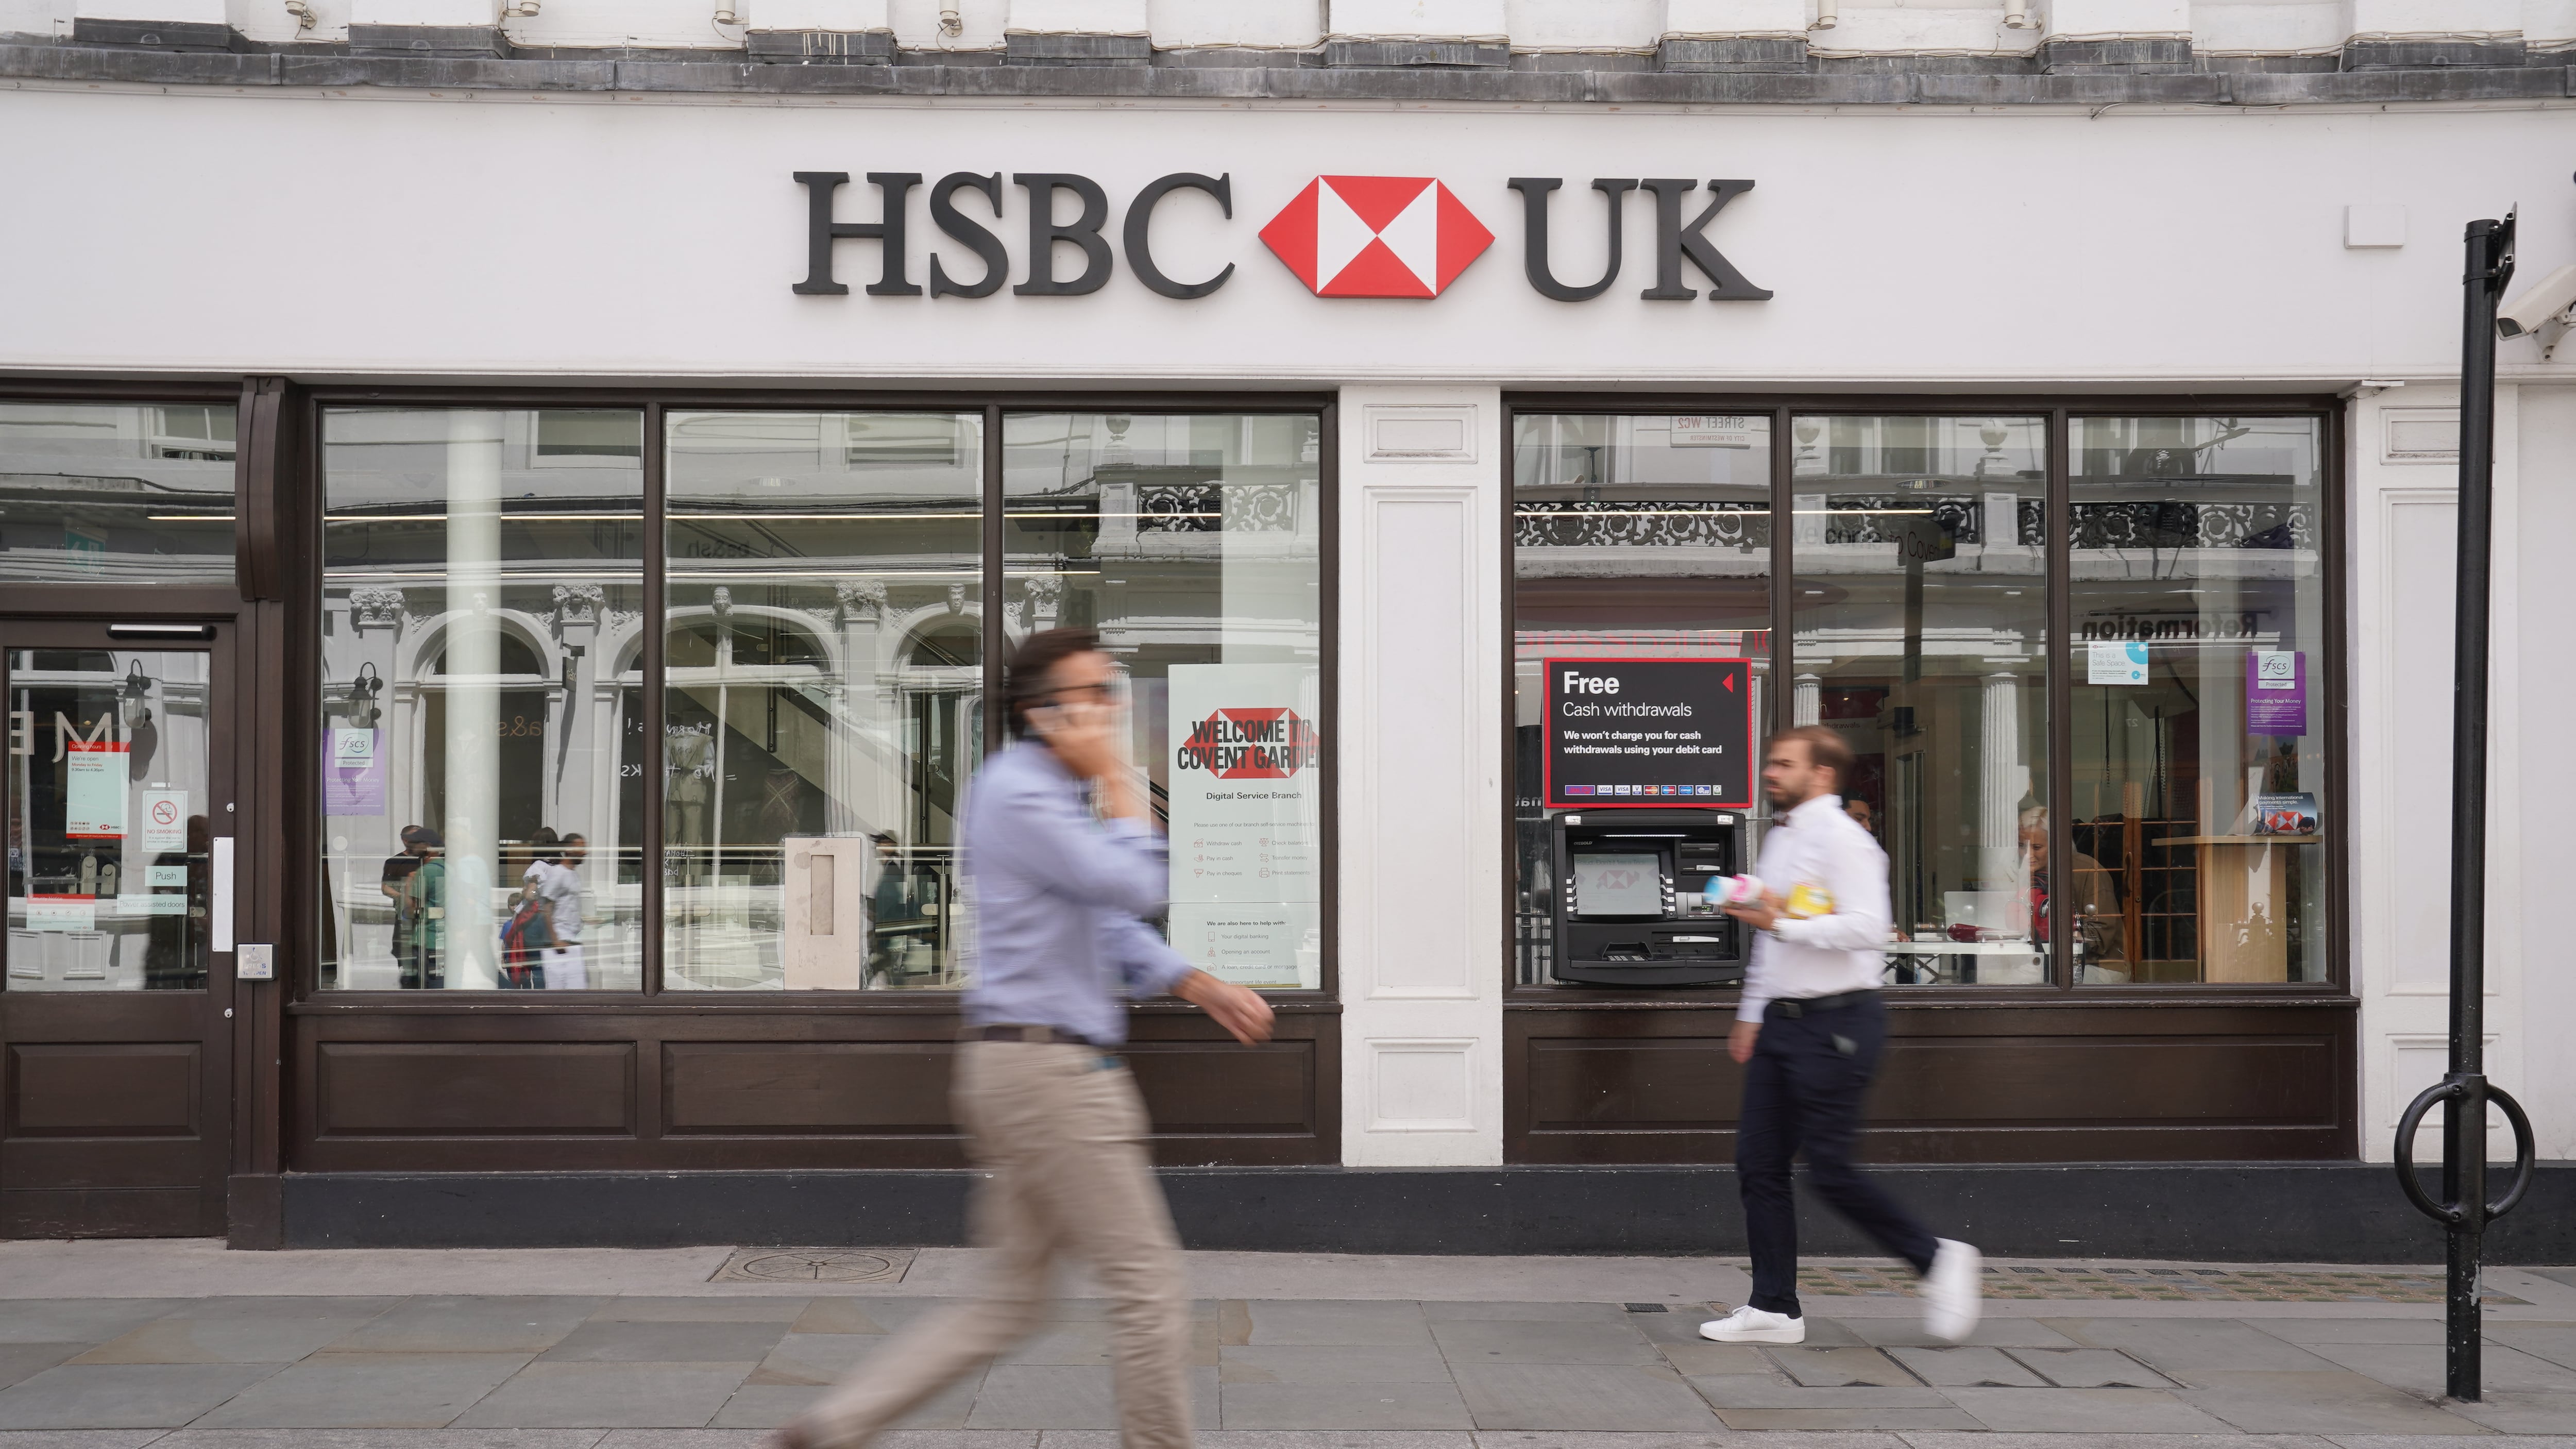 HSBC has become the latest bank to apologise to customers after some were left locked out of their online banking